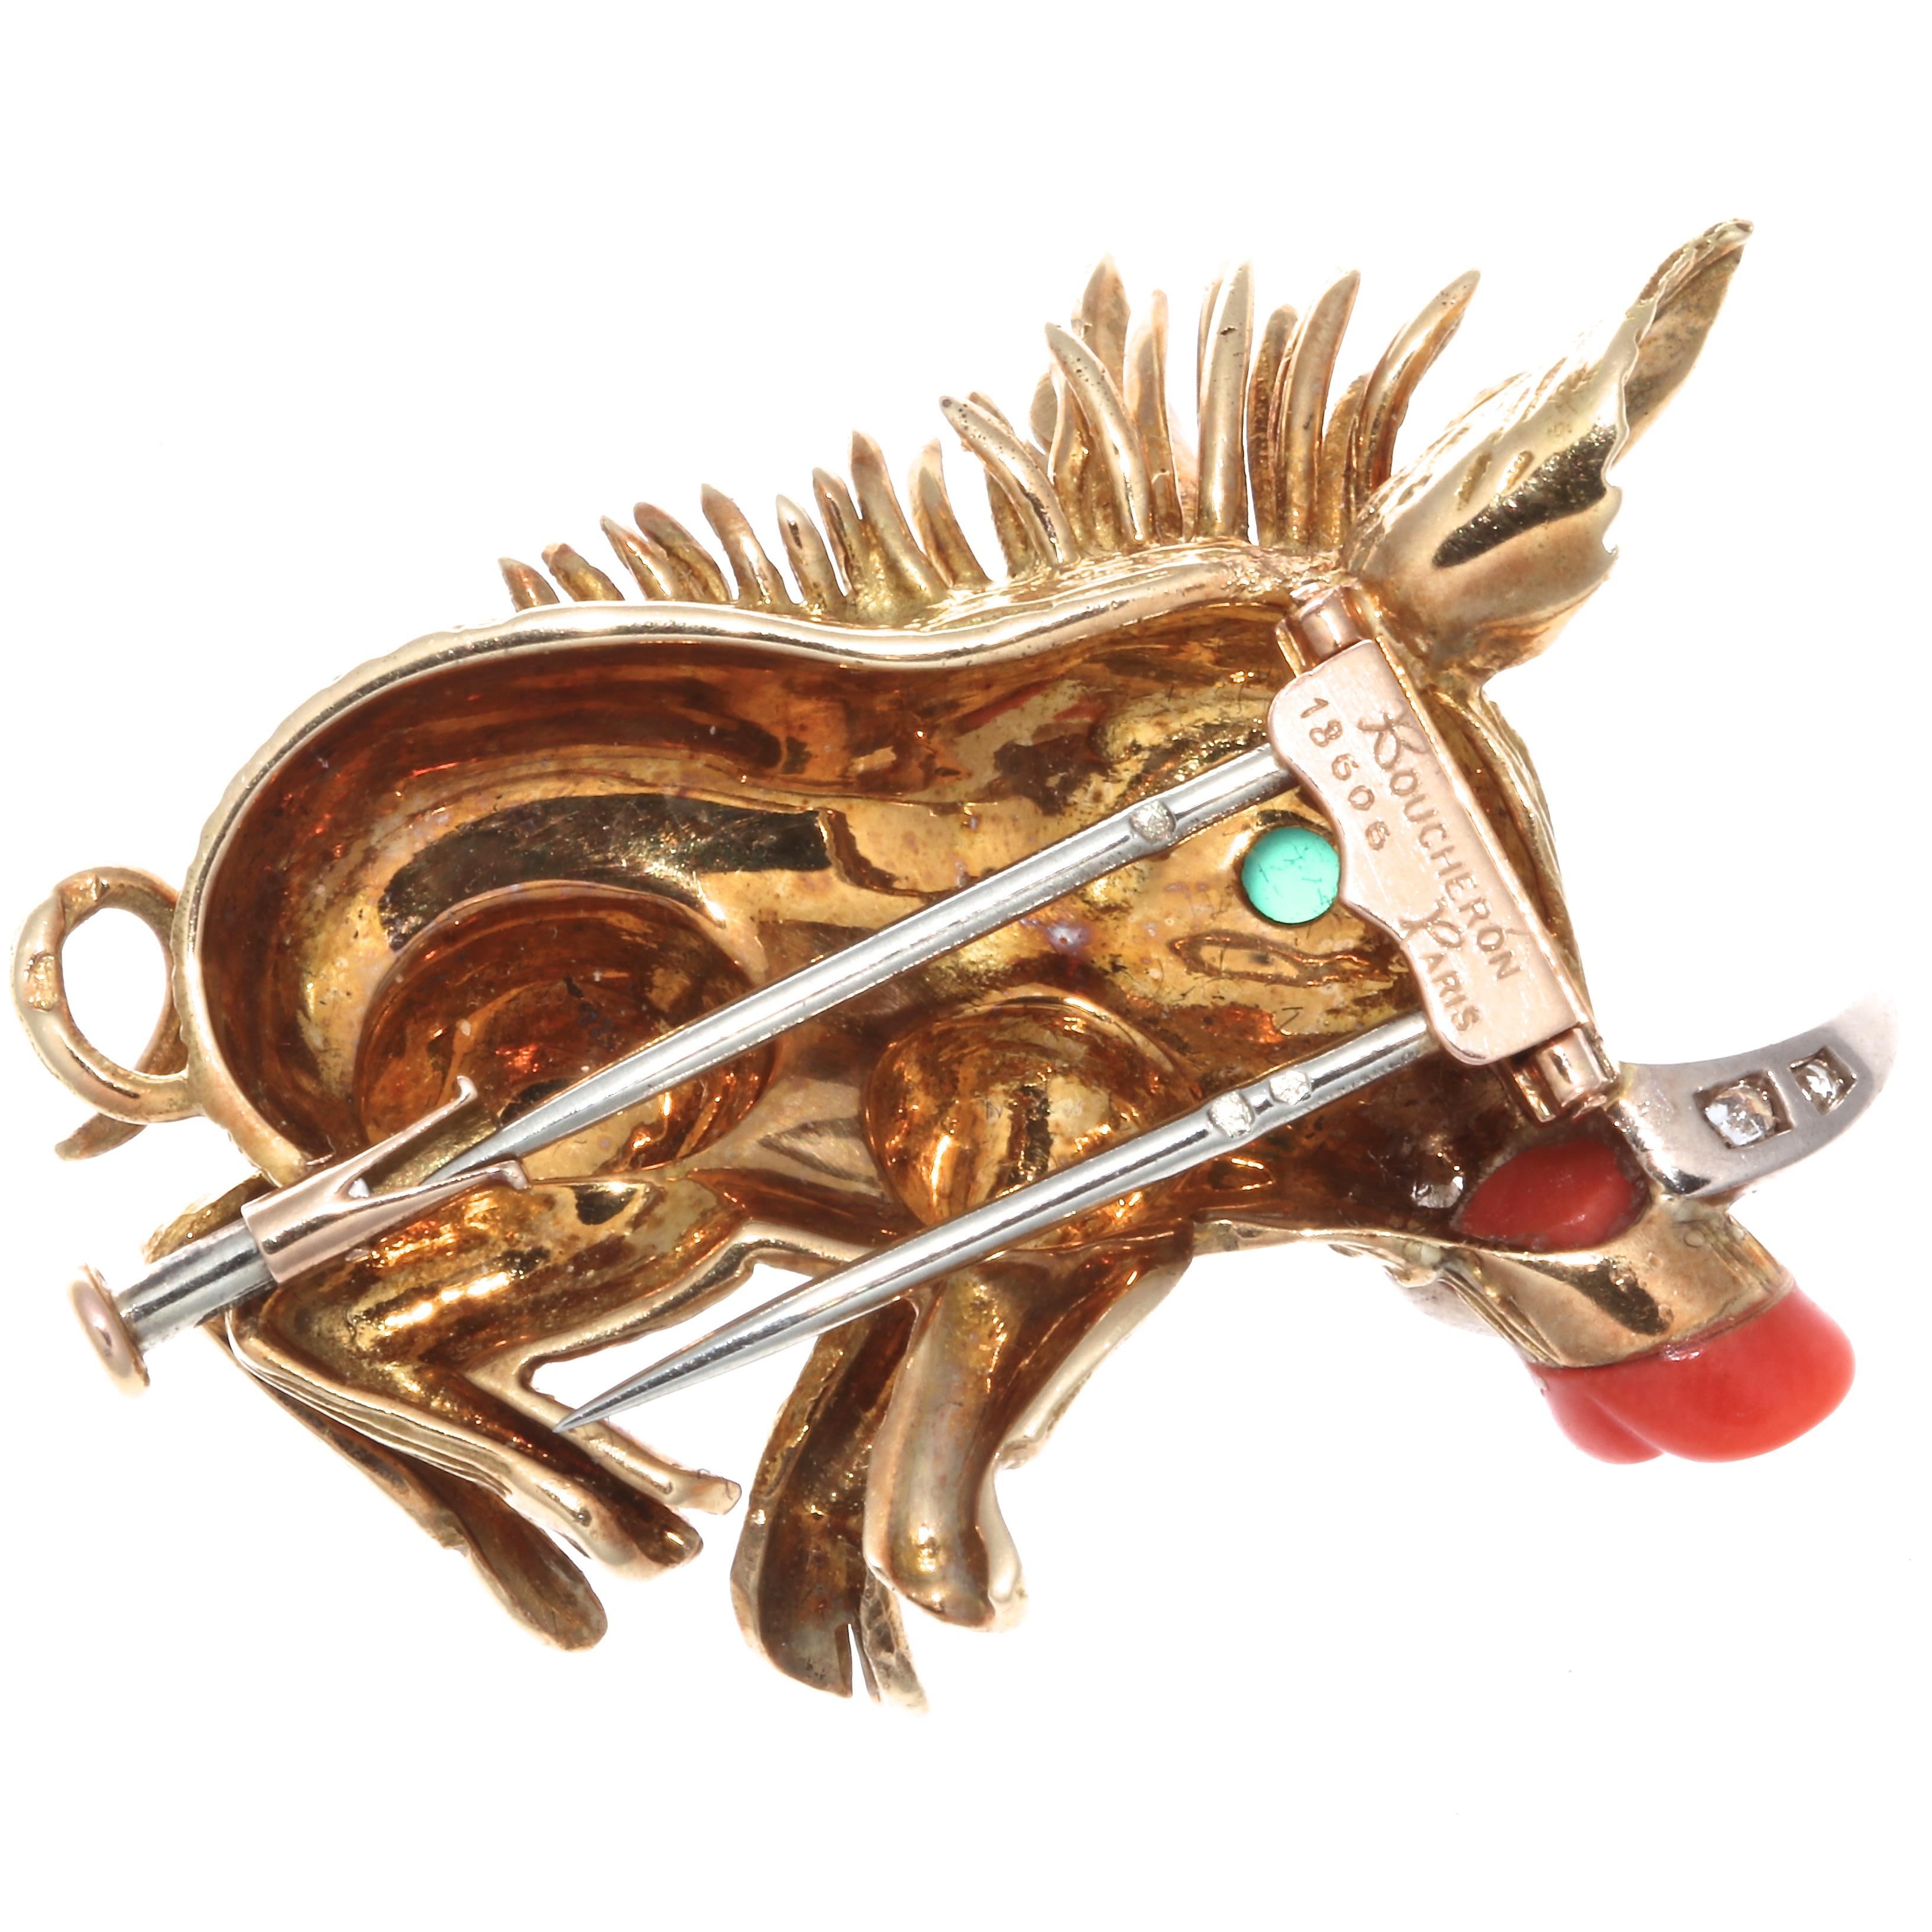 A Boucheron Paris conversation starter, a diamond emerald coral boar brooch. With 5 single cut diamonds that weigh approximately 0.15 carats, graded D-E color, VVS clarity. The eye is made of a cabochon chrysophrase that weighs approximately .10